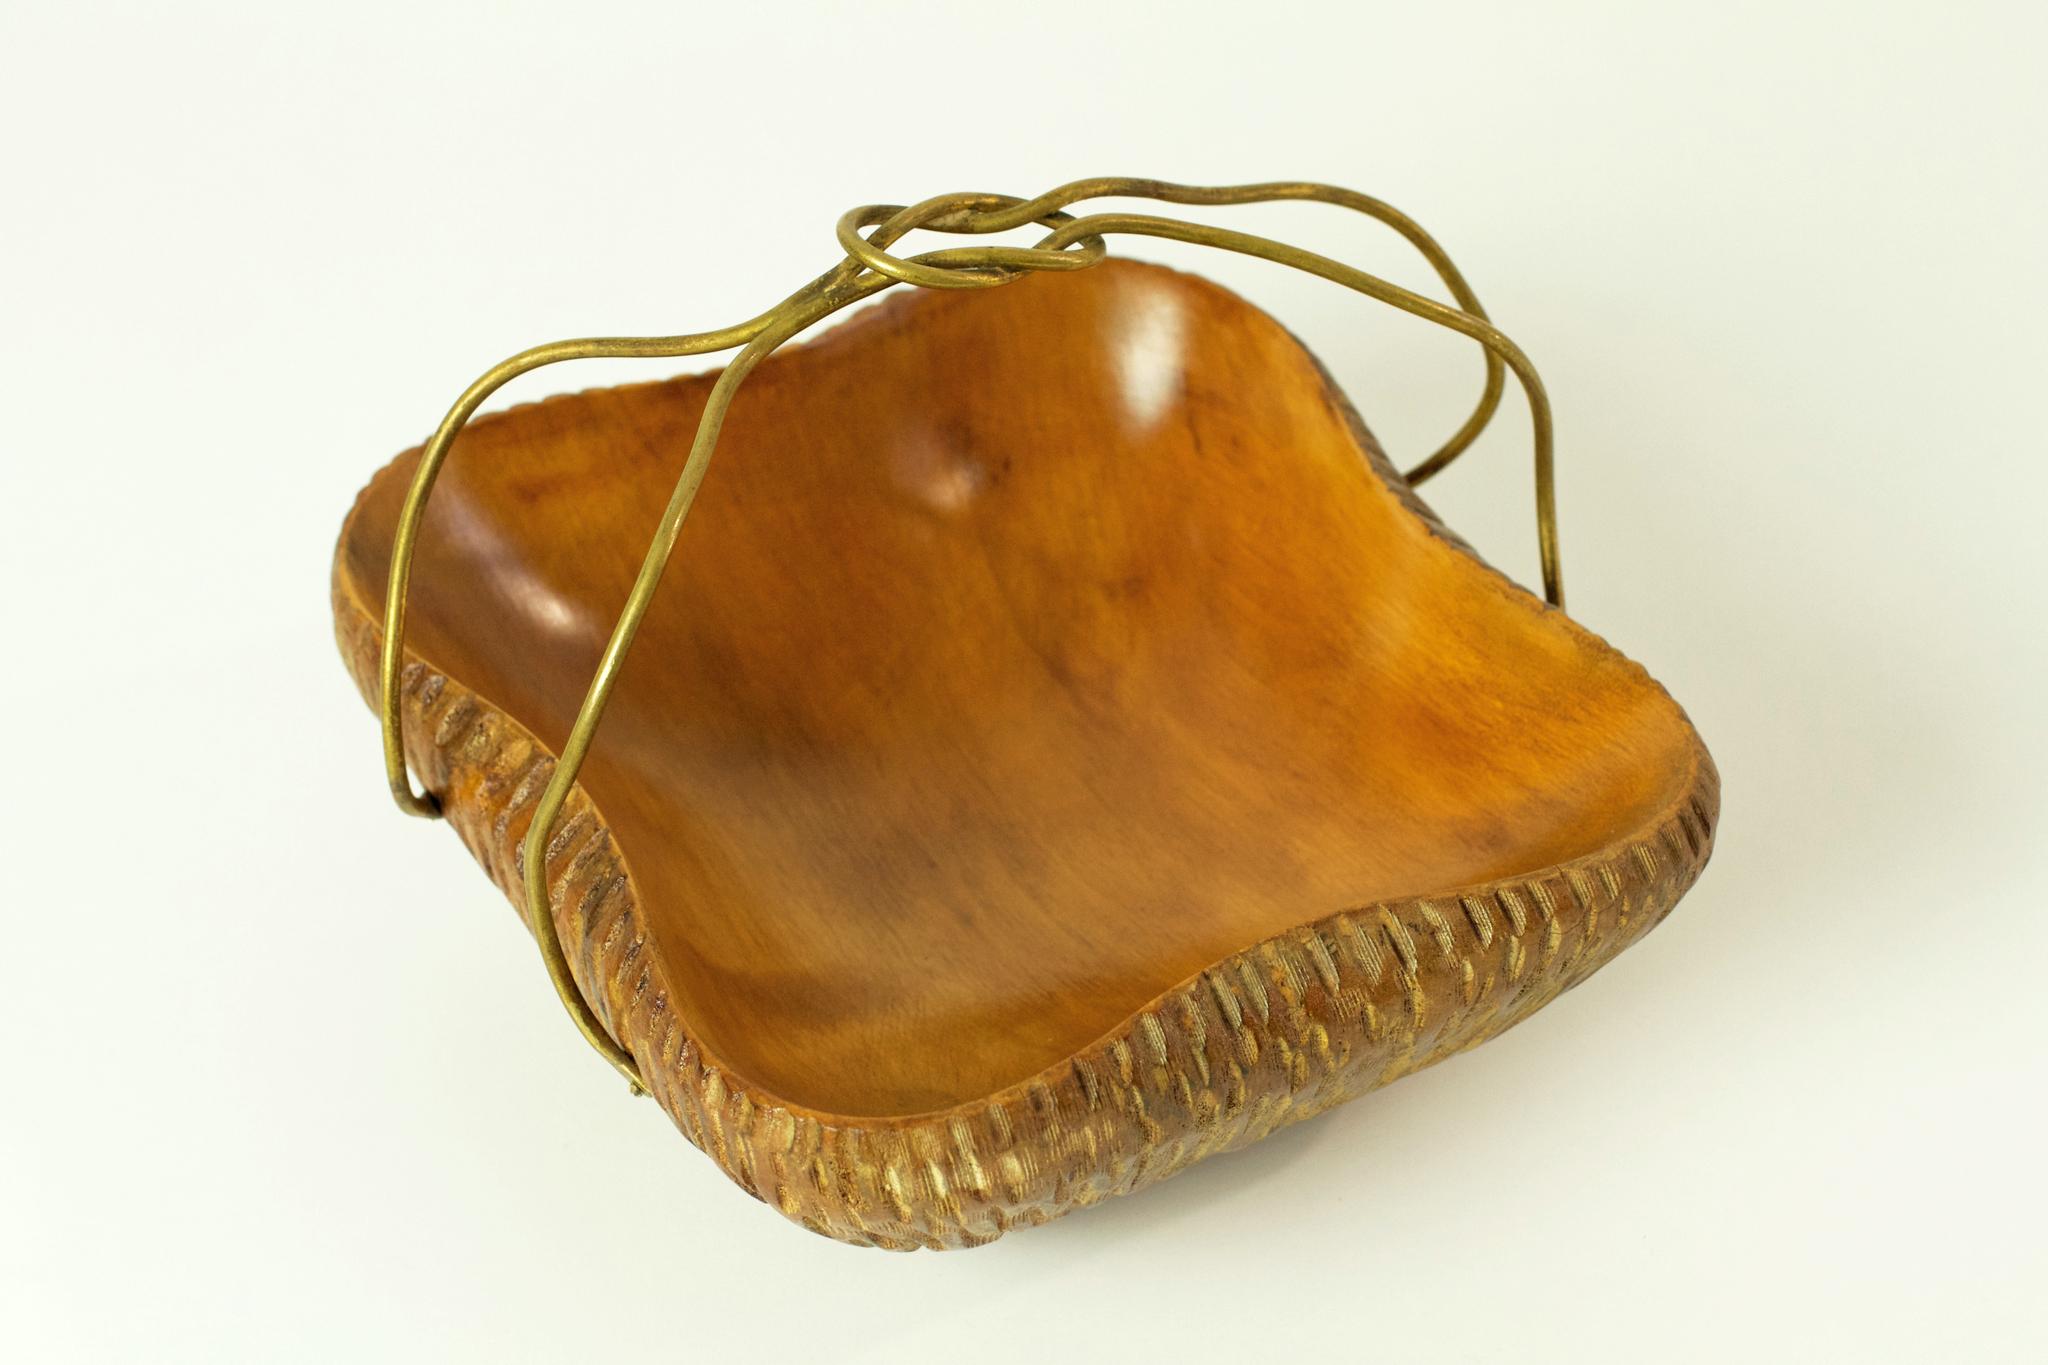 An artisanal basket handmade in the 1950's from maple wood and brass.